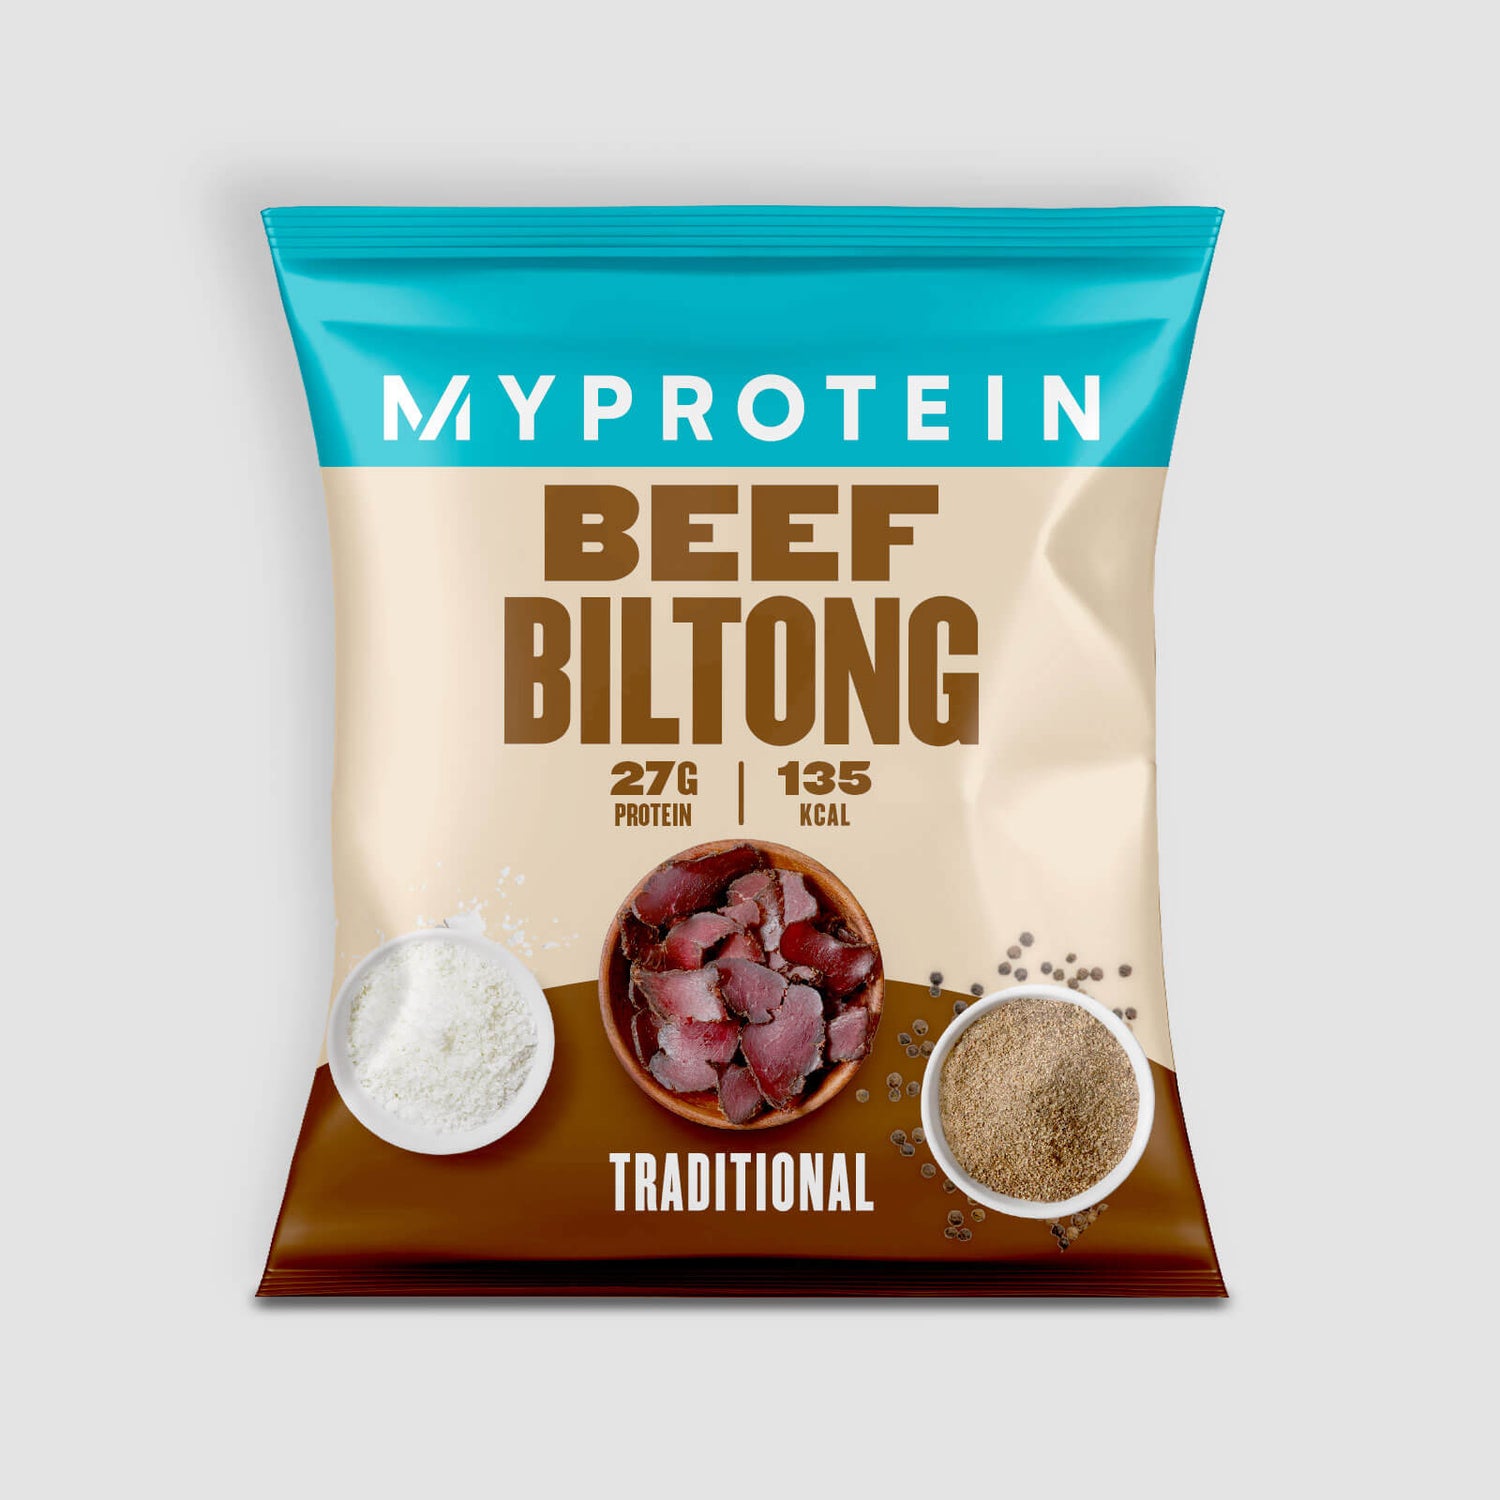 Myprotein Beef Biltong - 50g - Traditional